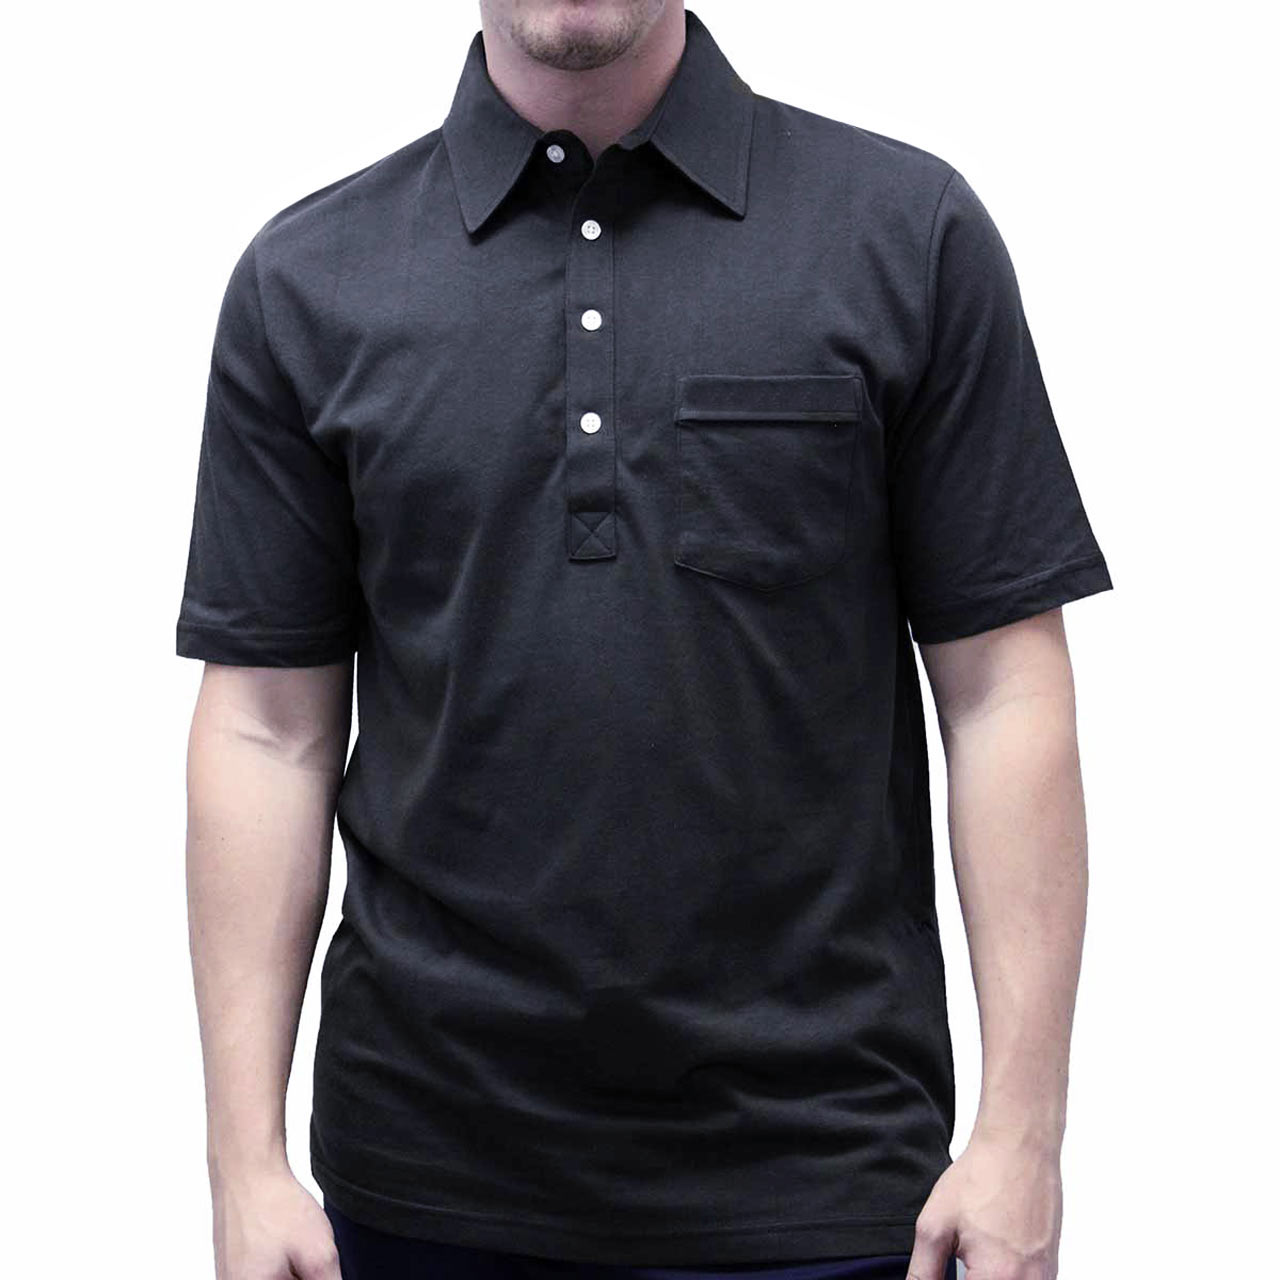 Men's Classics By Palmland Short Sleeve Shirt Open Bottom Solid Polo With Texture #6040, IN 7 COLORS